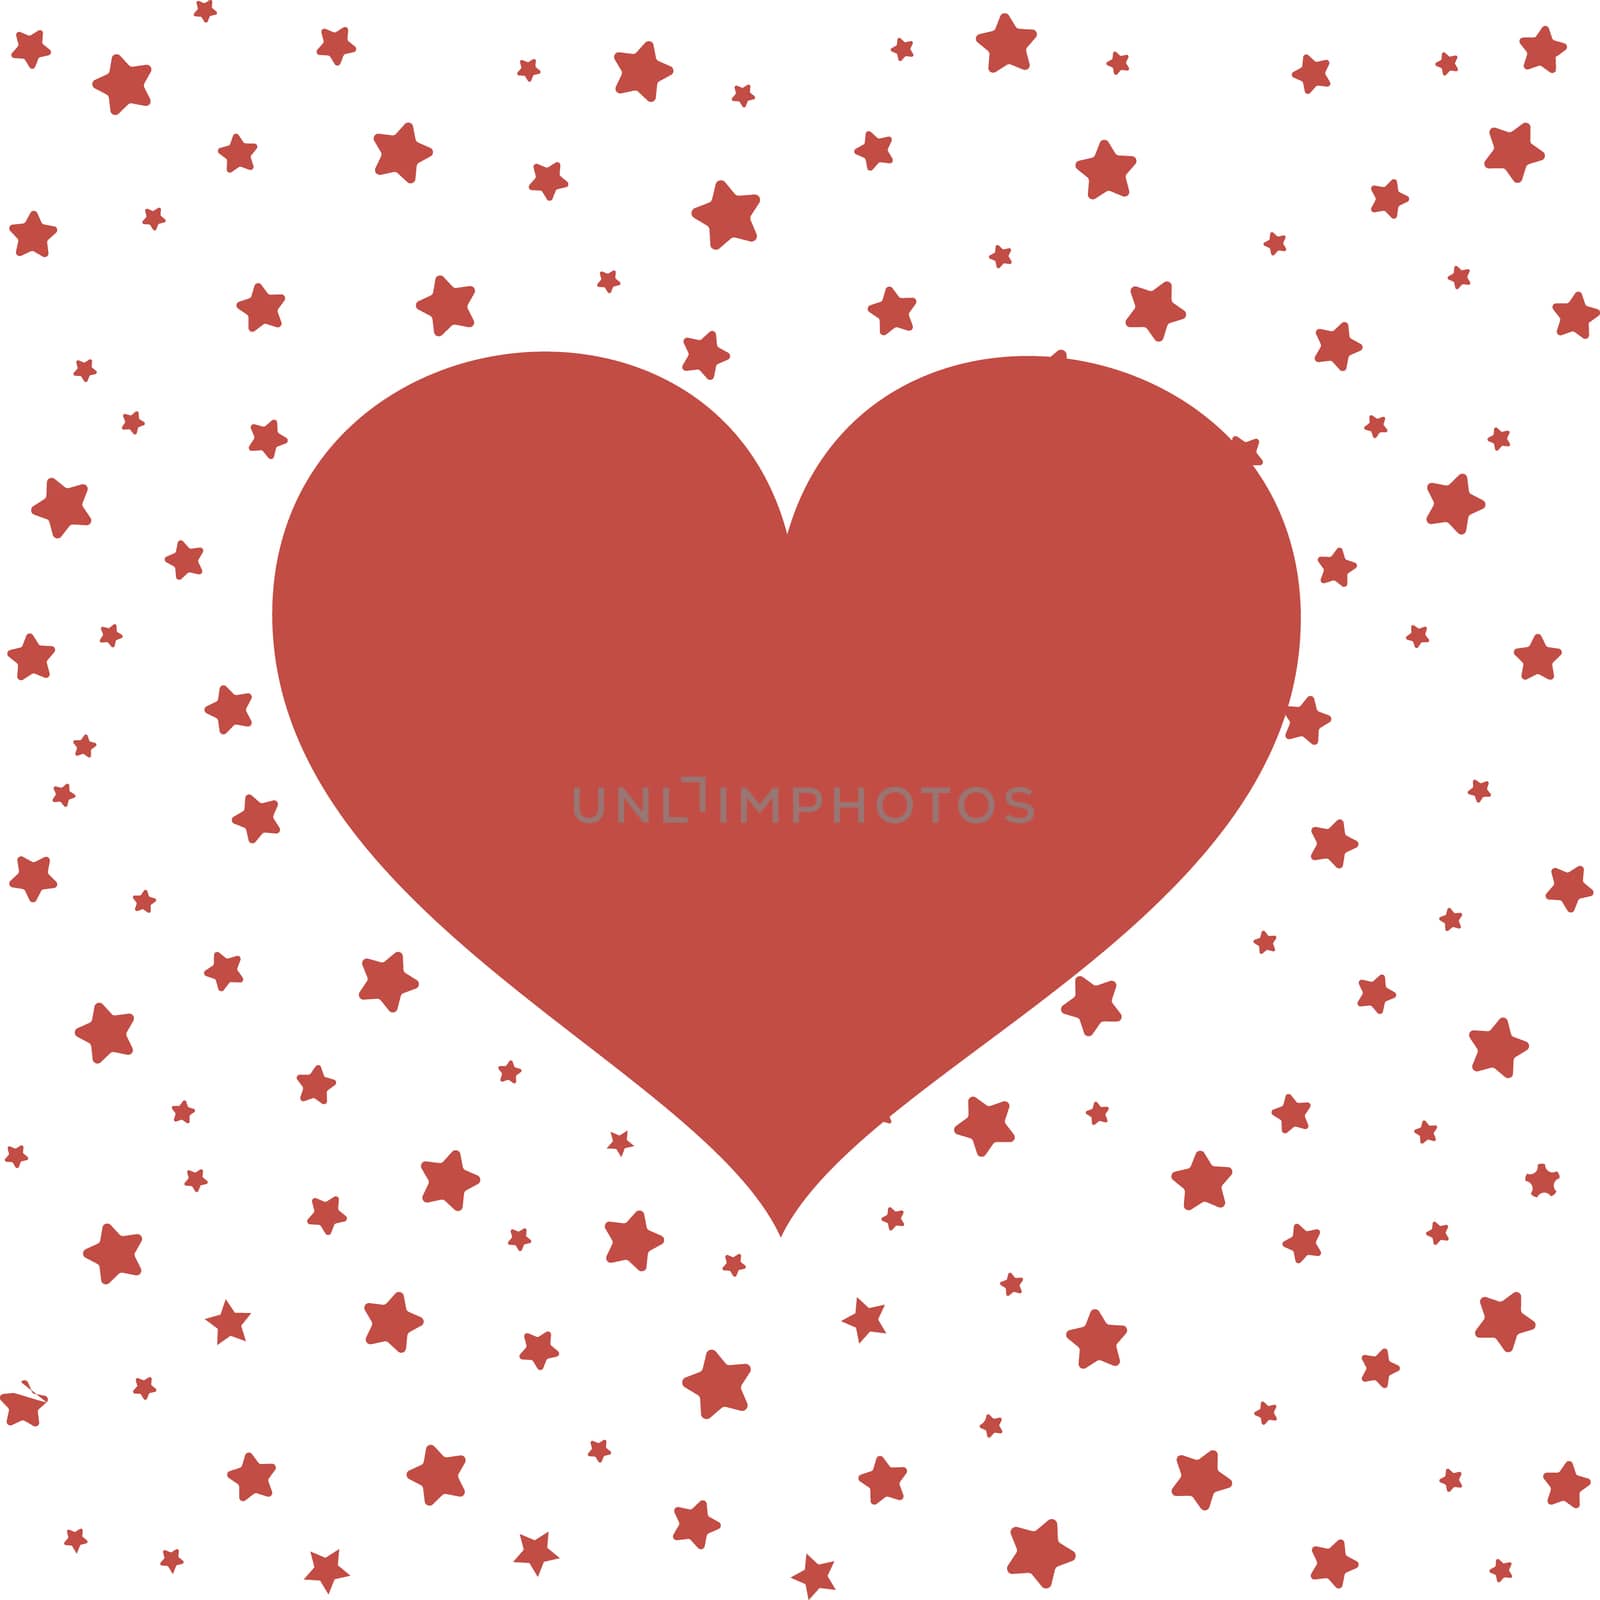 Red love heart on a white background with red stars. Valentine's day, illustration